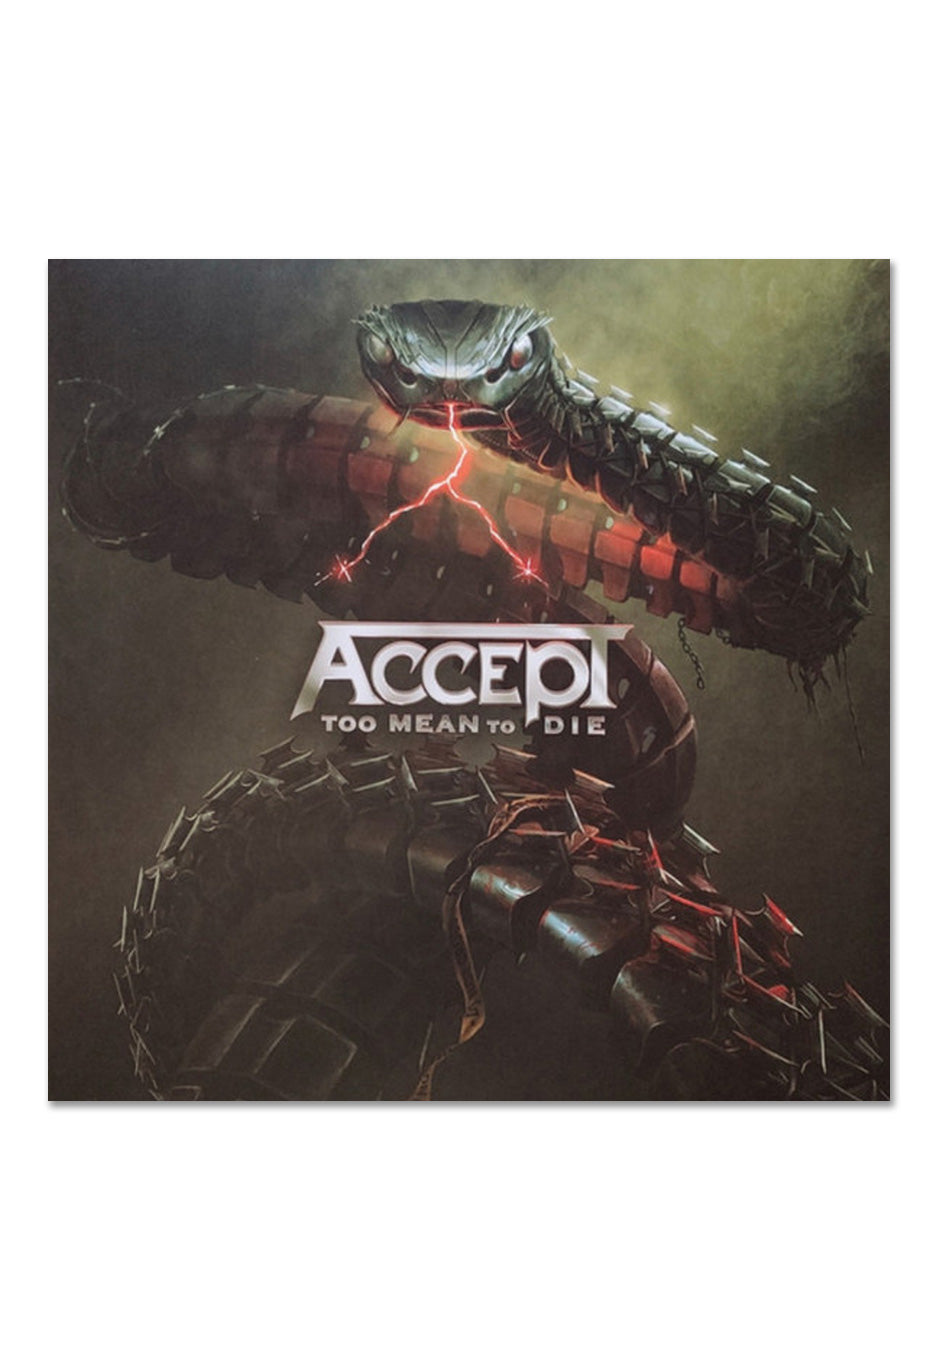 Accept - Too Mean To Die Ltd. Silver - Colored 2 Vinyl